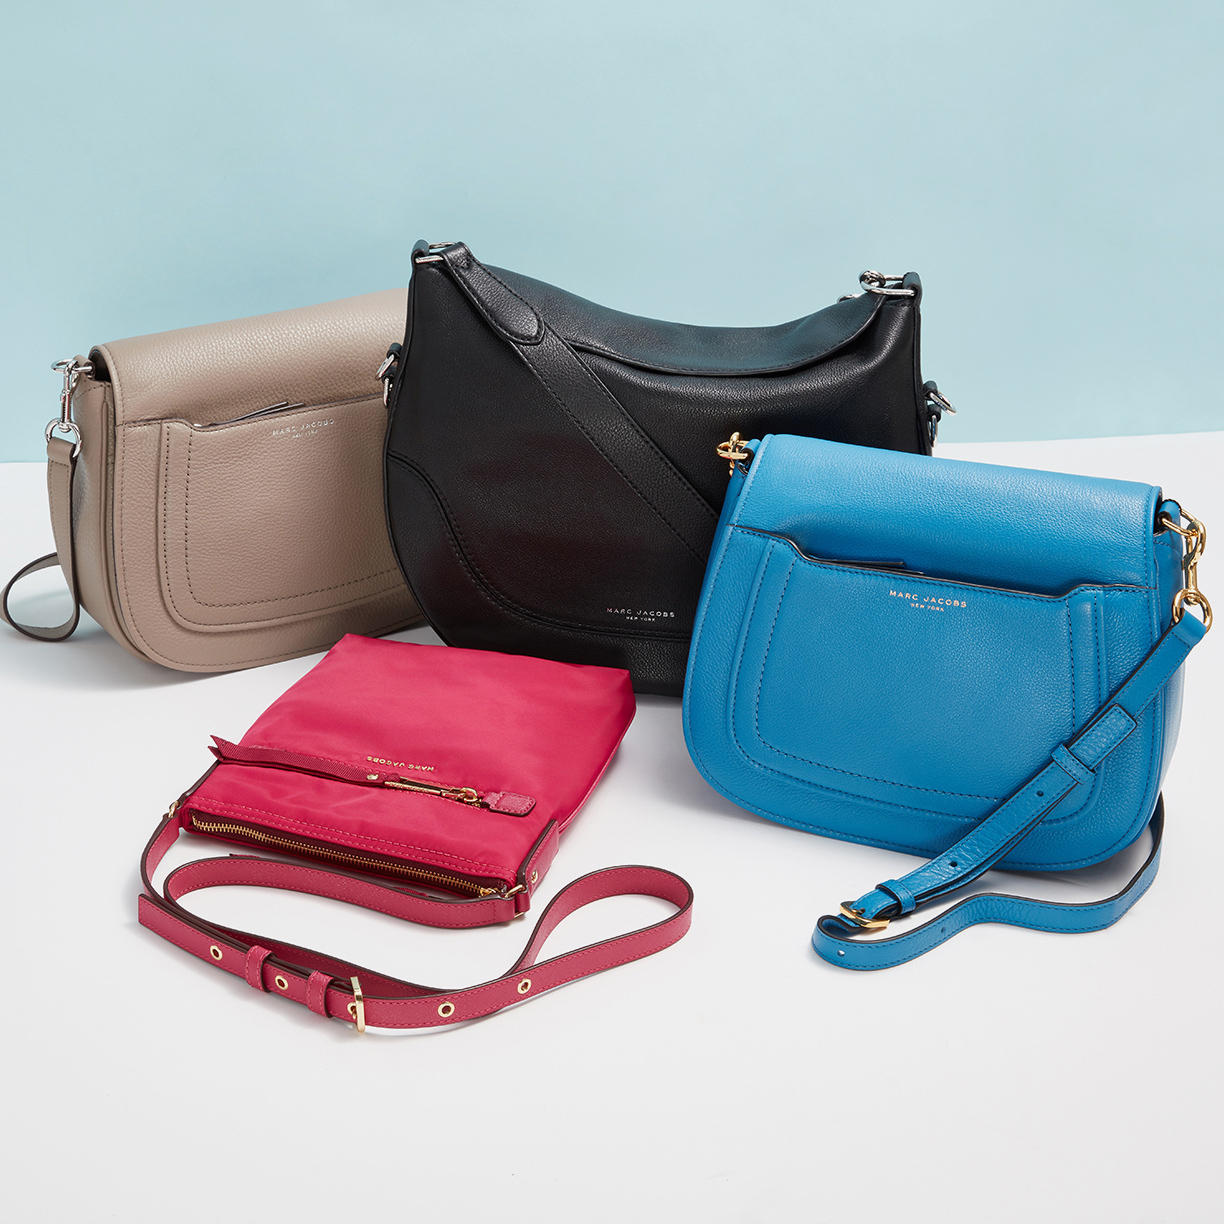 Marc Jacobs Bags & More Up to 50% Off